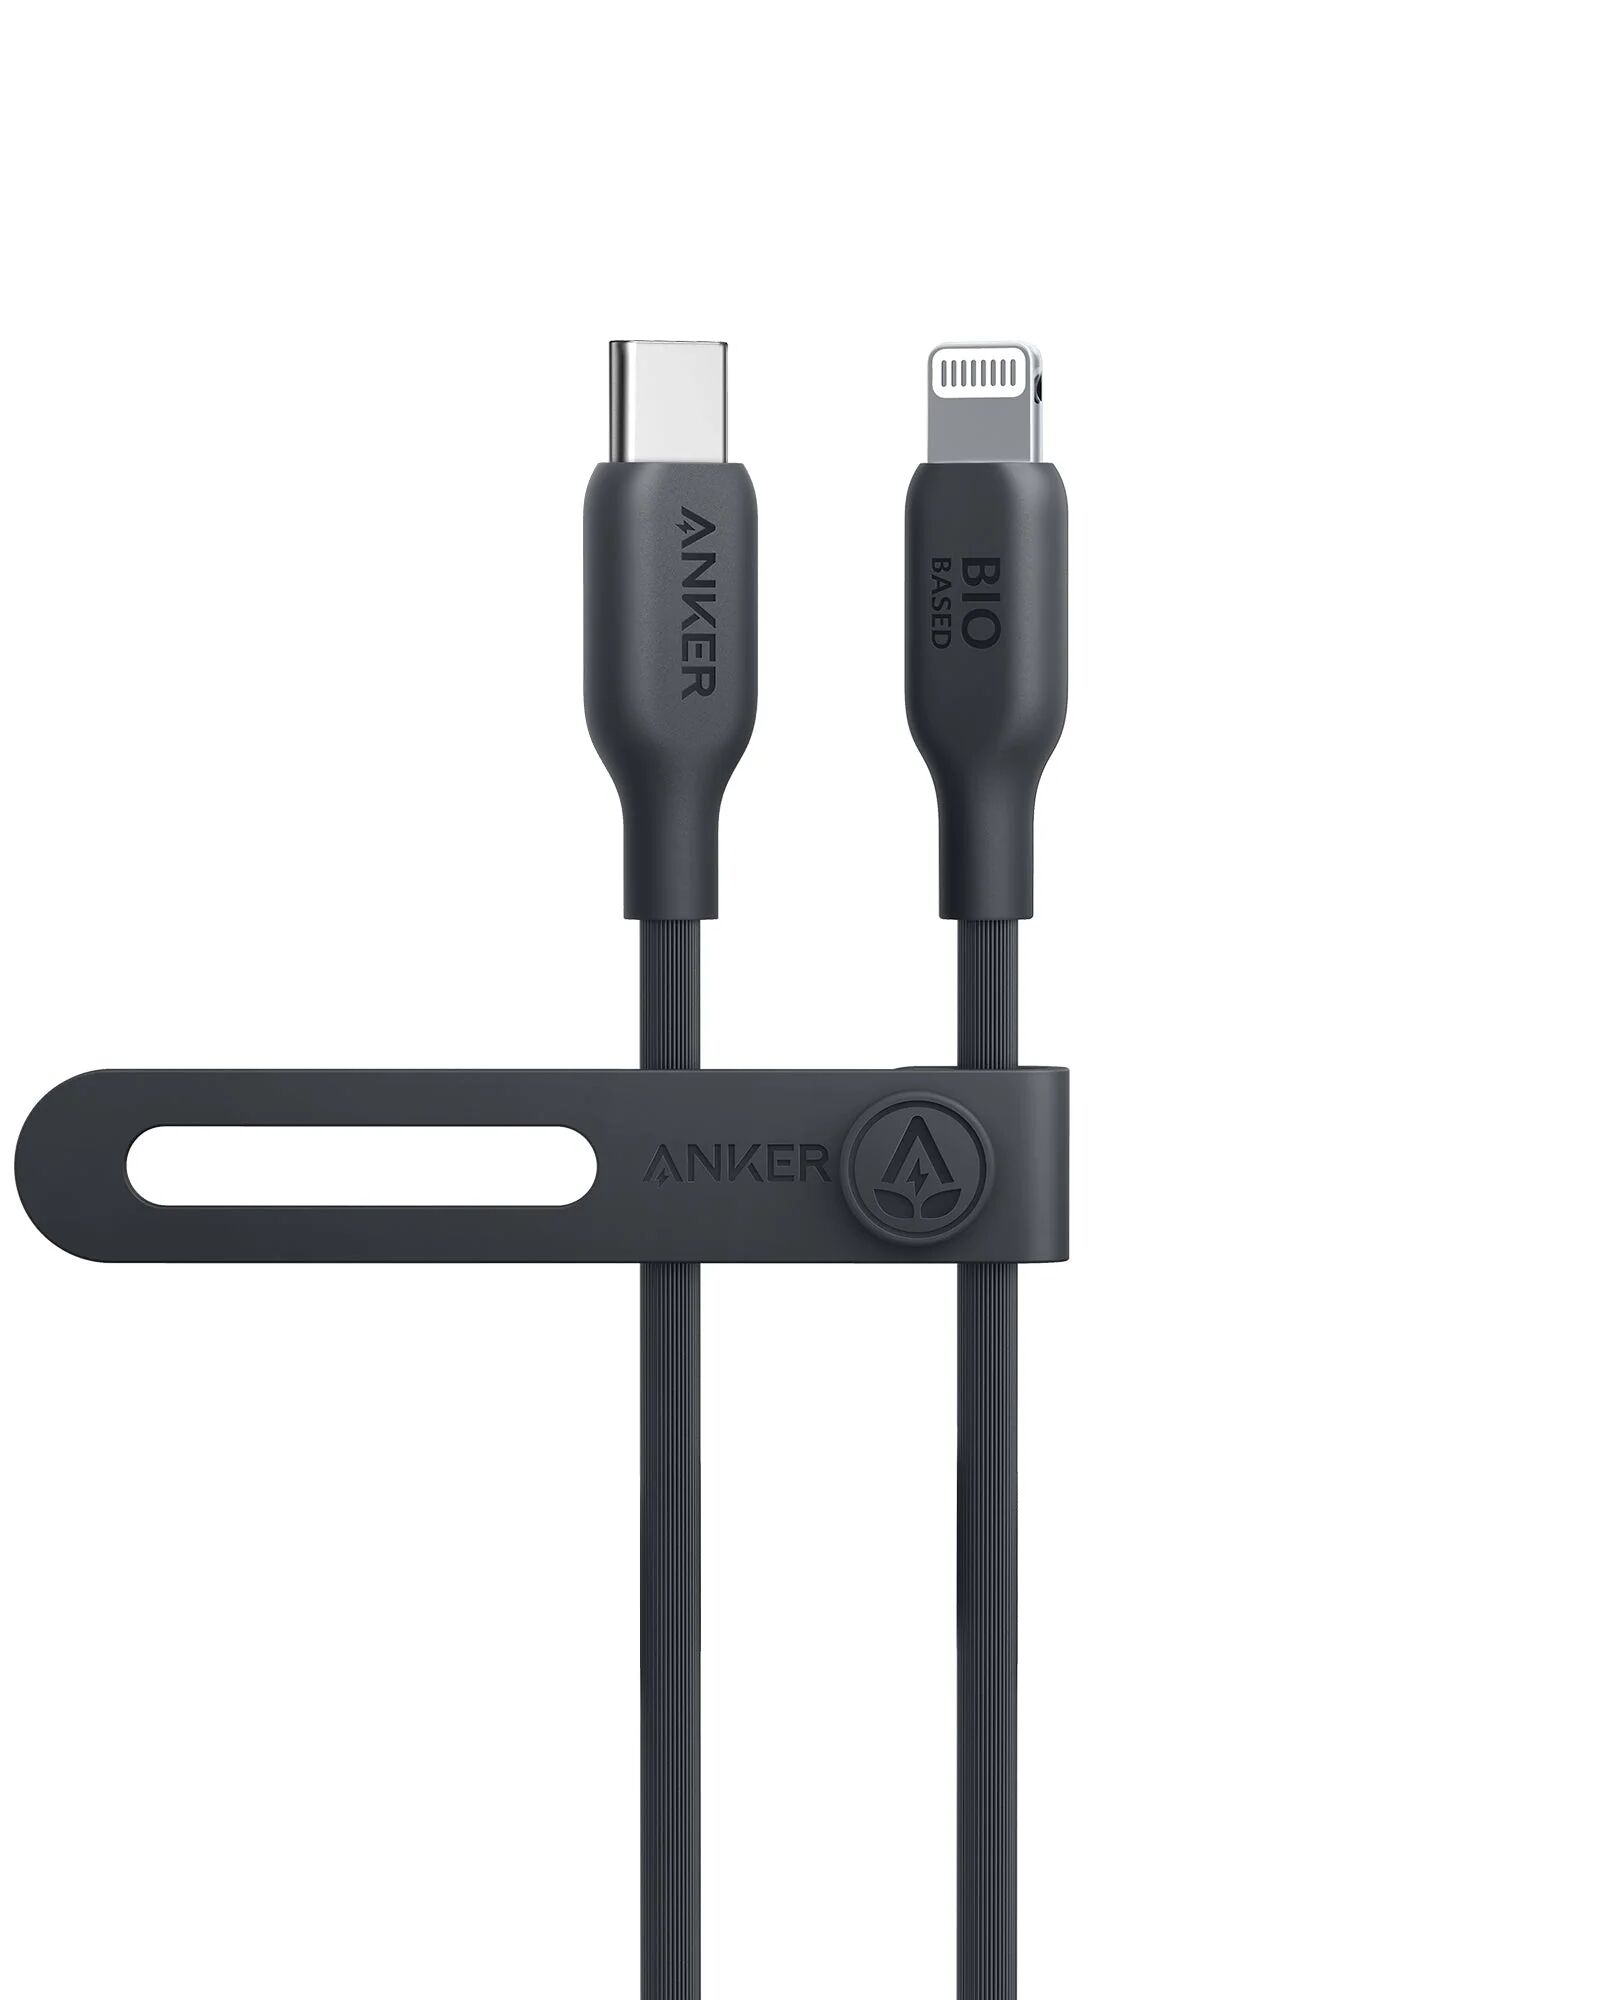 Photos - Cable (video, audio, USB) ANKER 541 USB-C to Lightning Cable  3ft / Aurora White (Bio-Based)